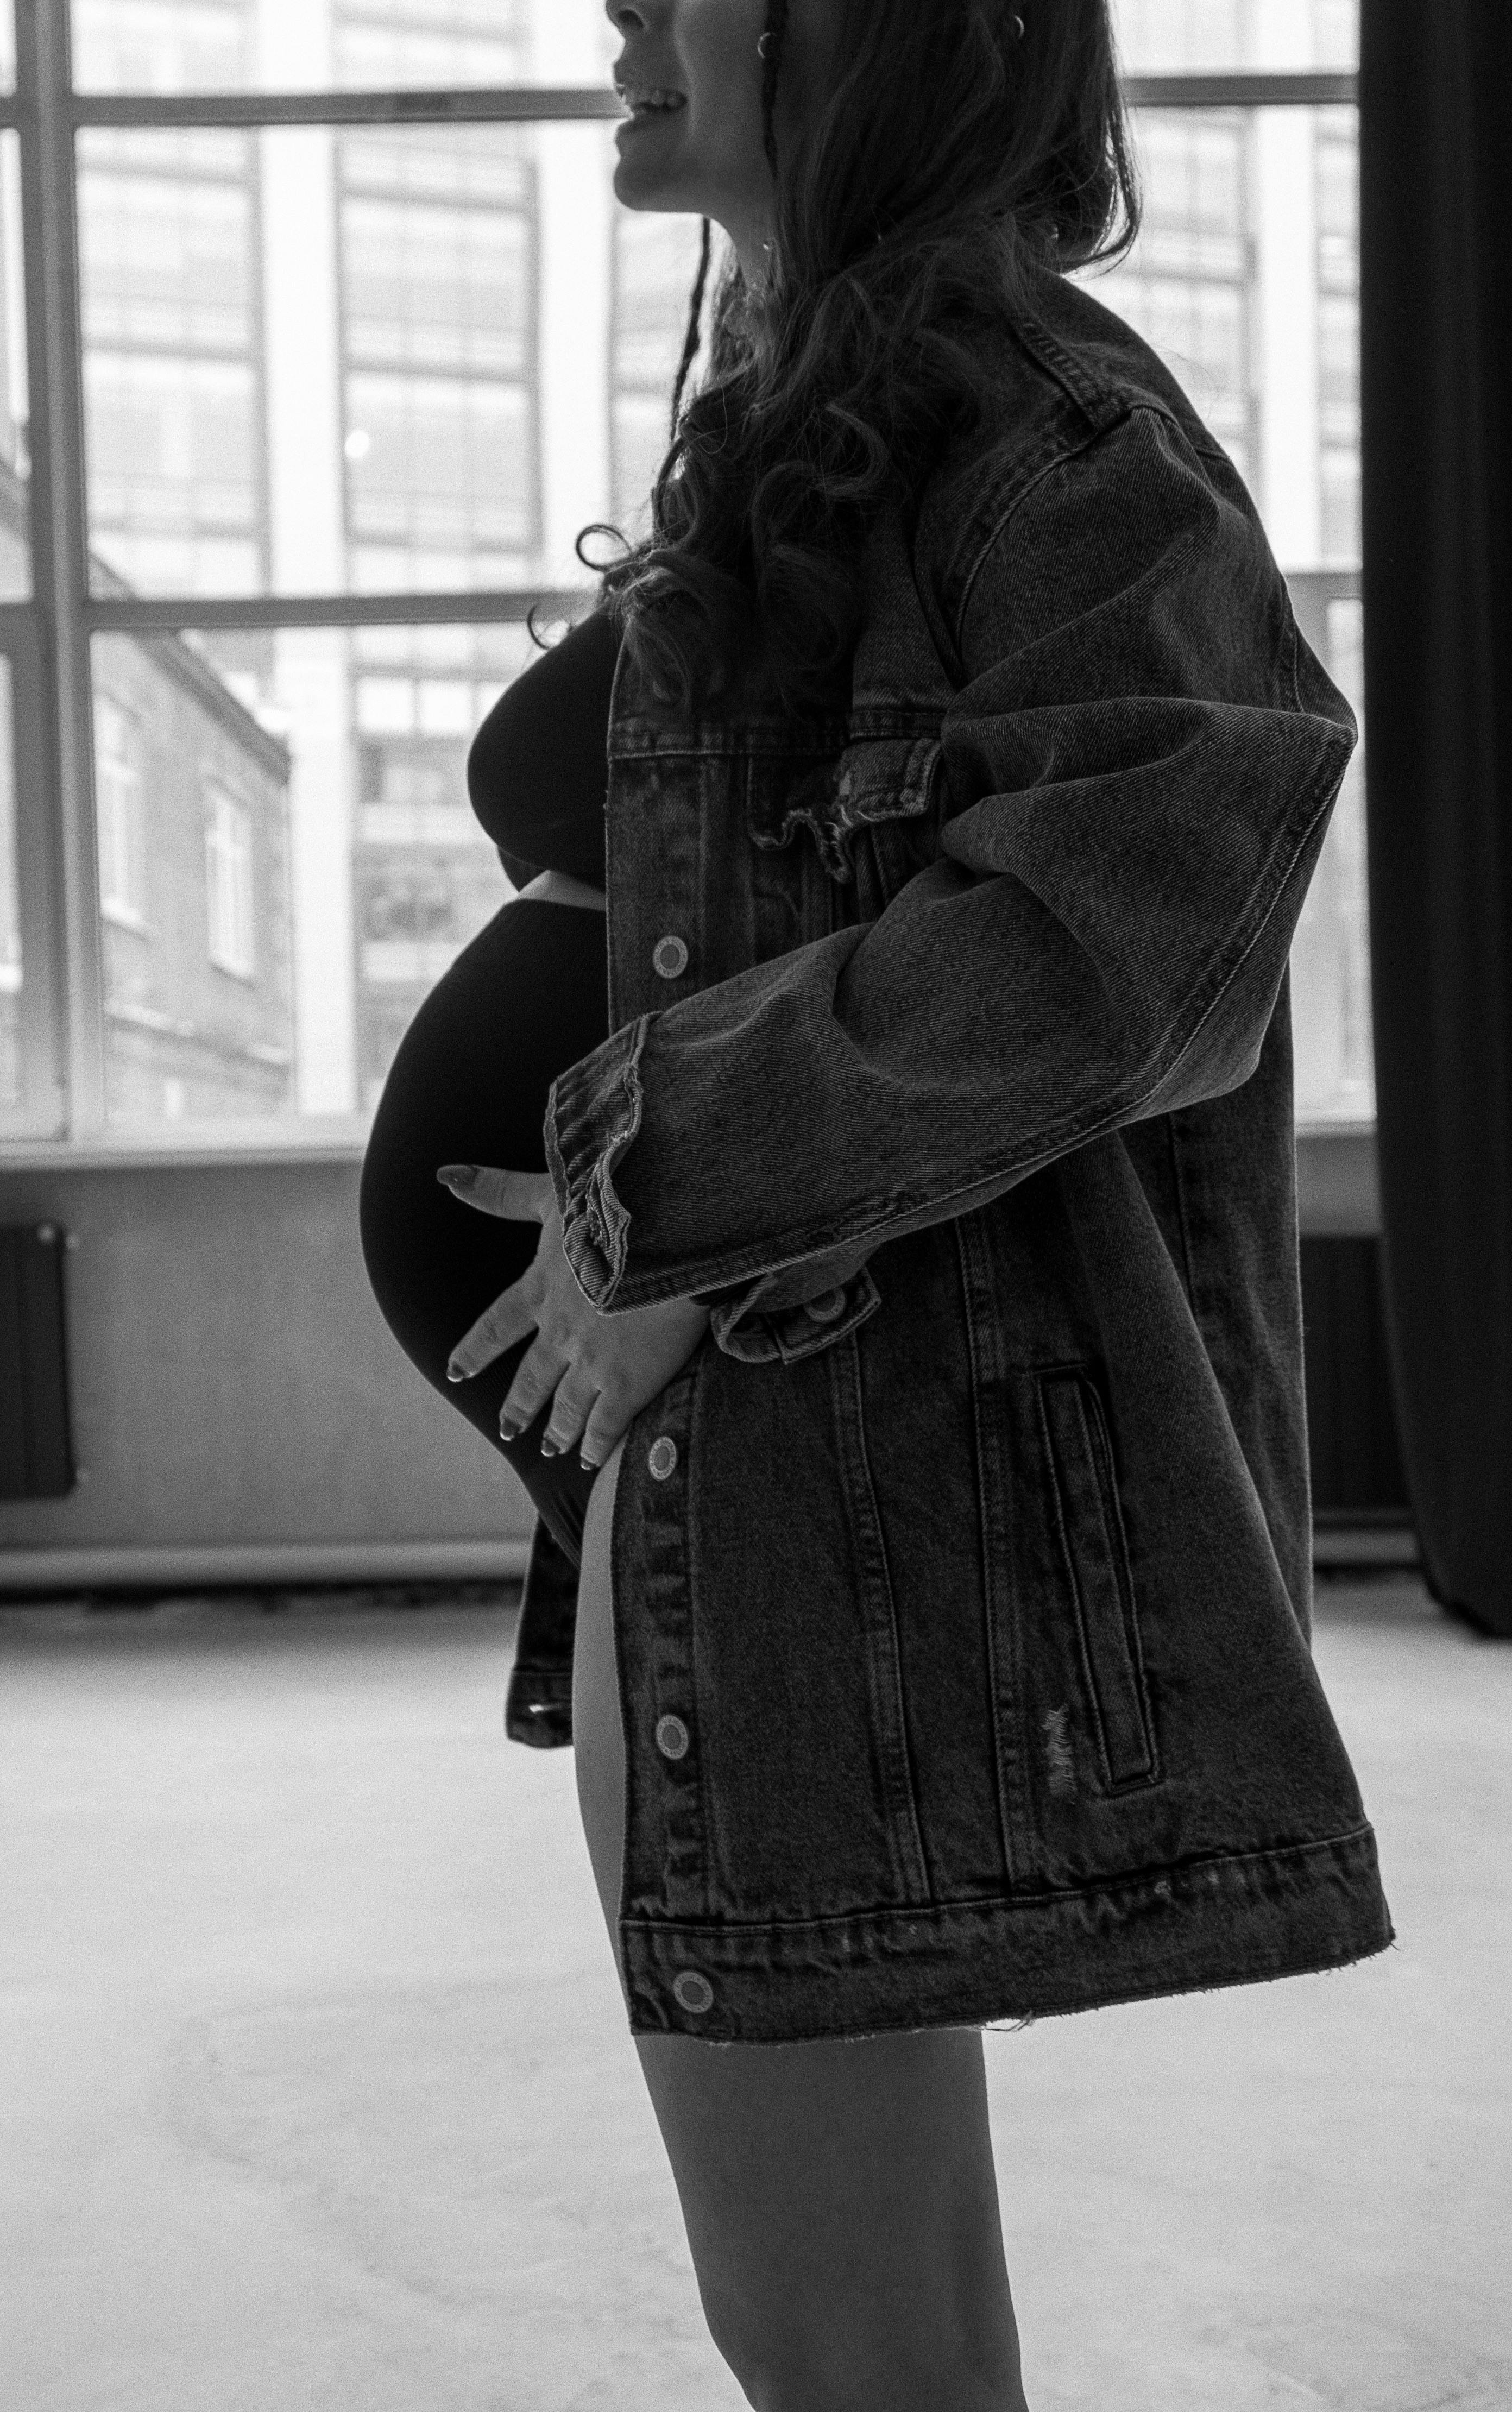 A Pregnant Woman in a Denim Jacket · Free Stock Photo